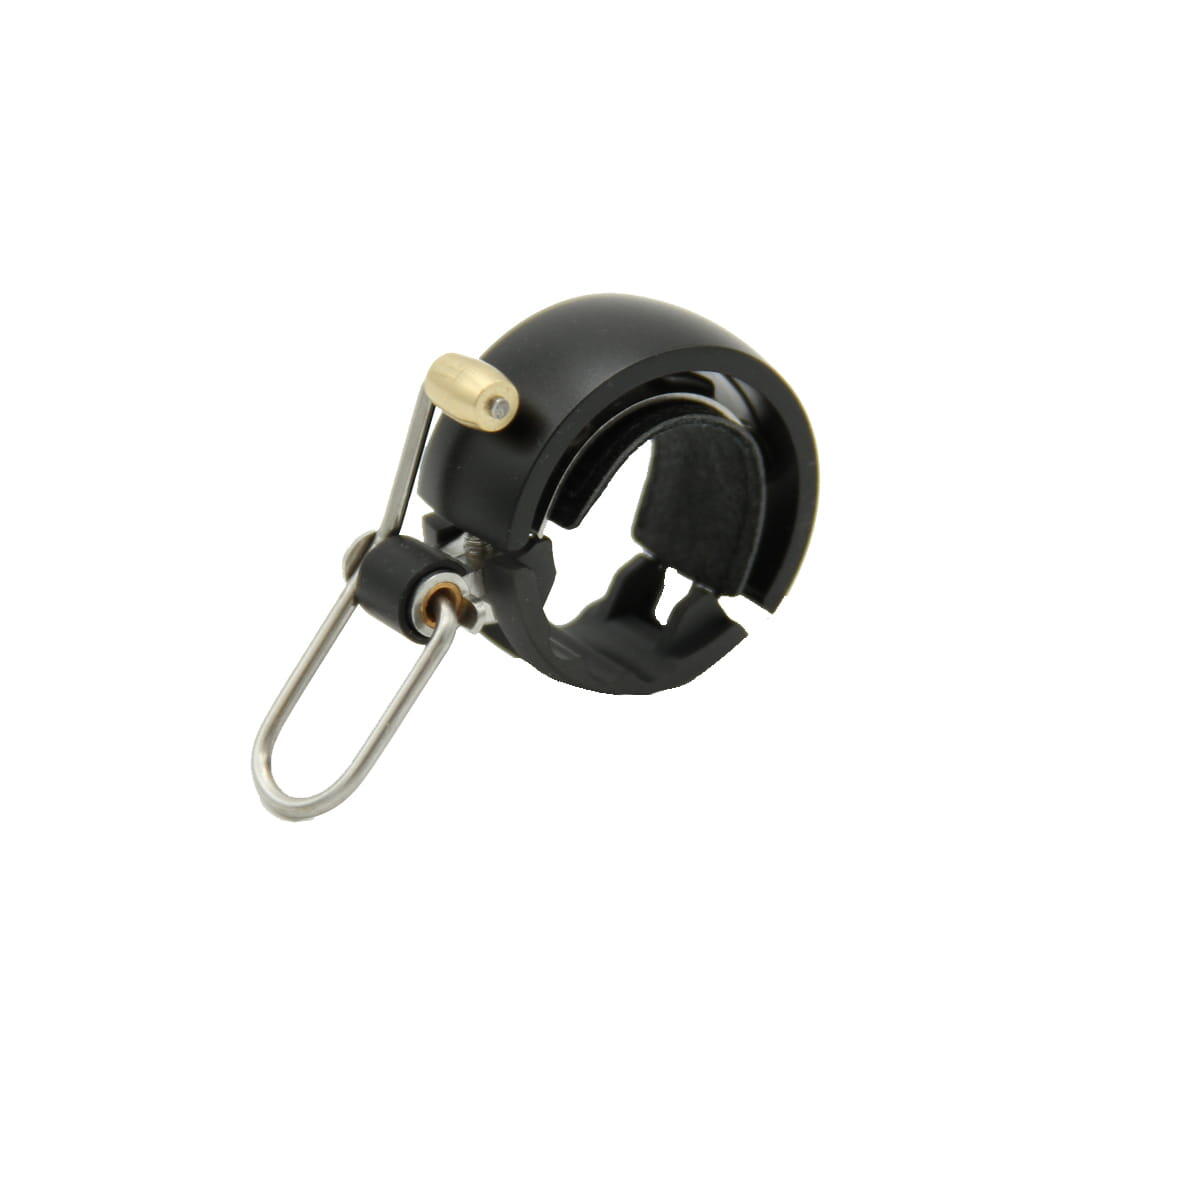 KNOG Knog Oi Luxe Bicycle Bell Small Matte Black